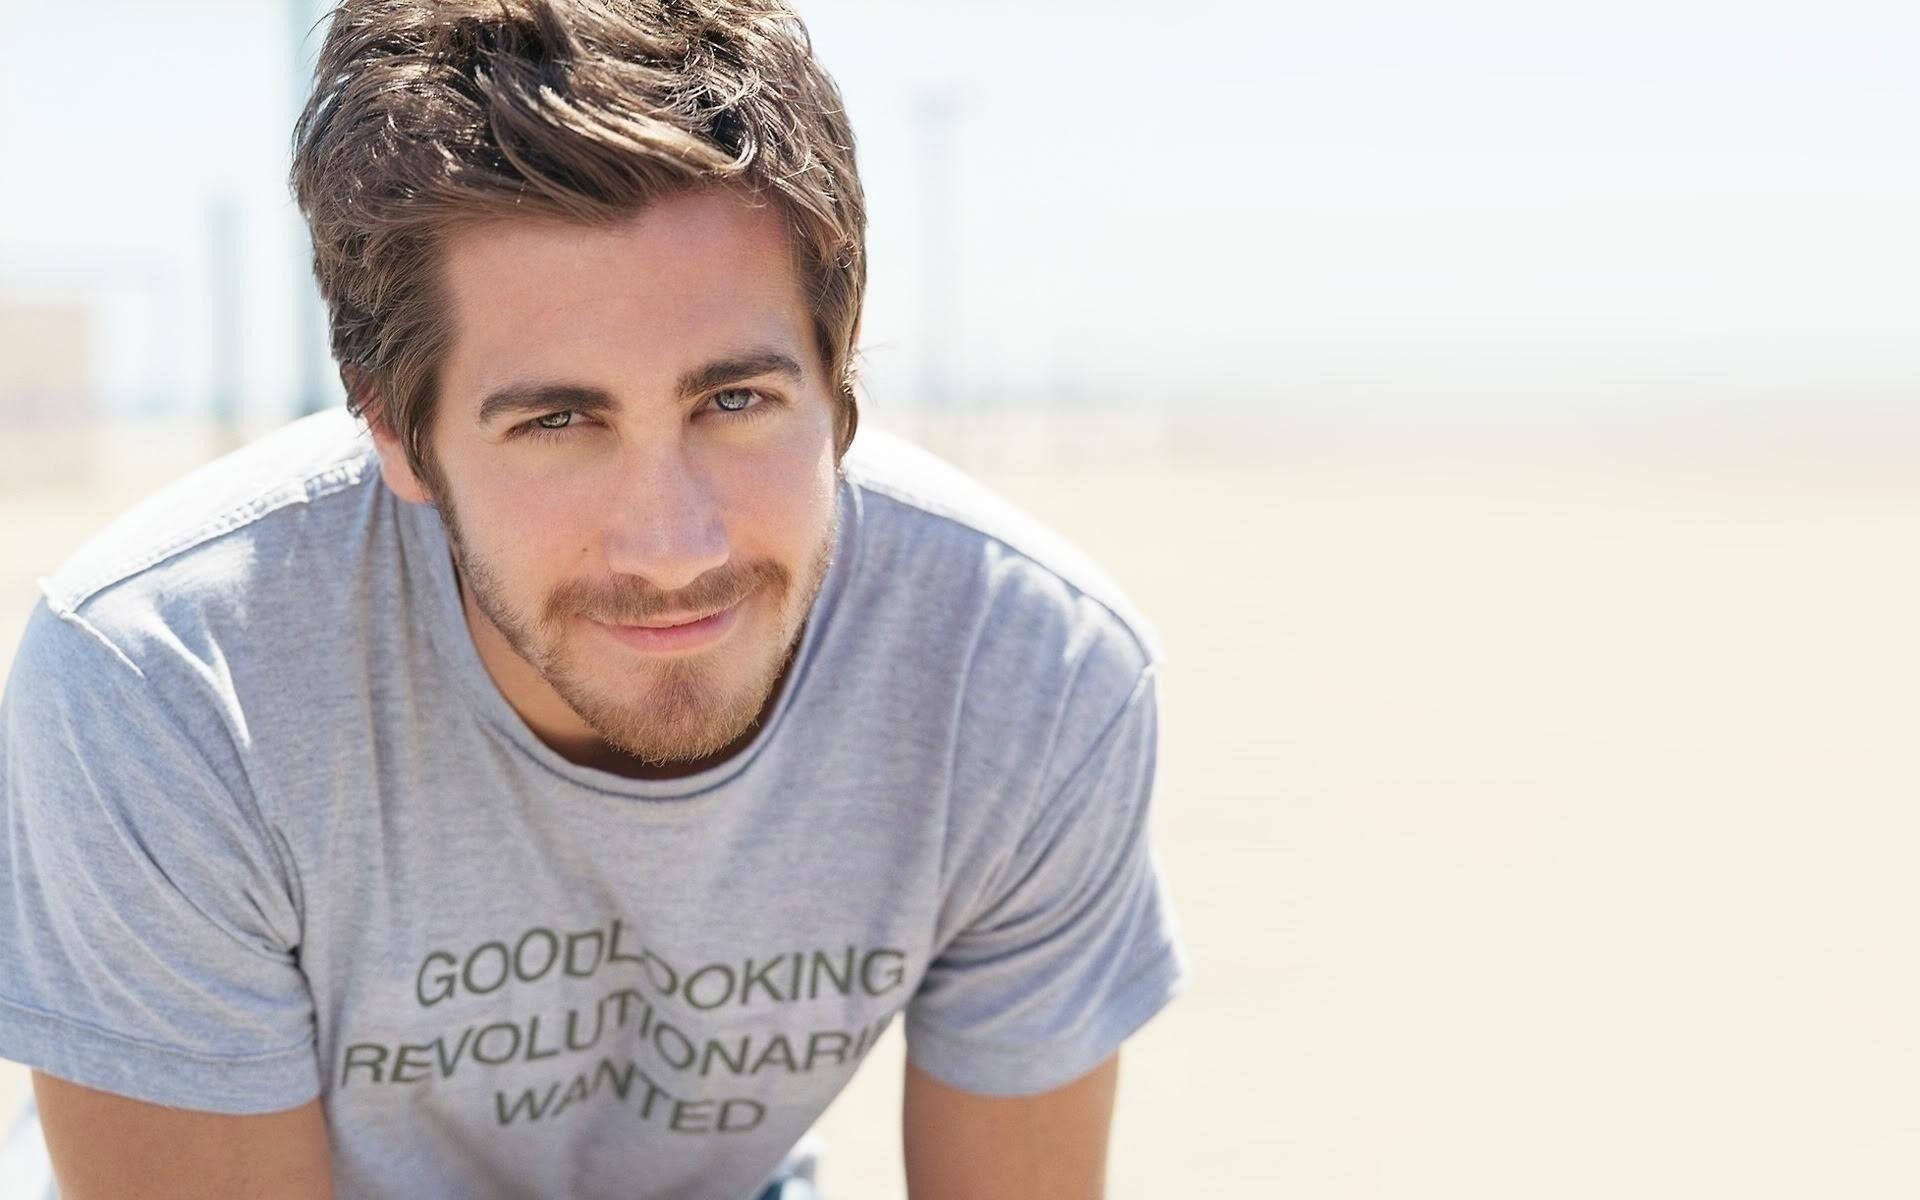 Jake Gyllenhaal Wallpaper High Resolution and Quality Download